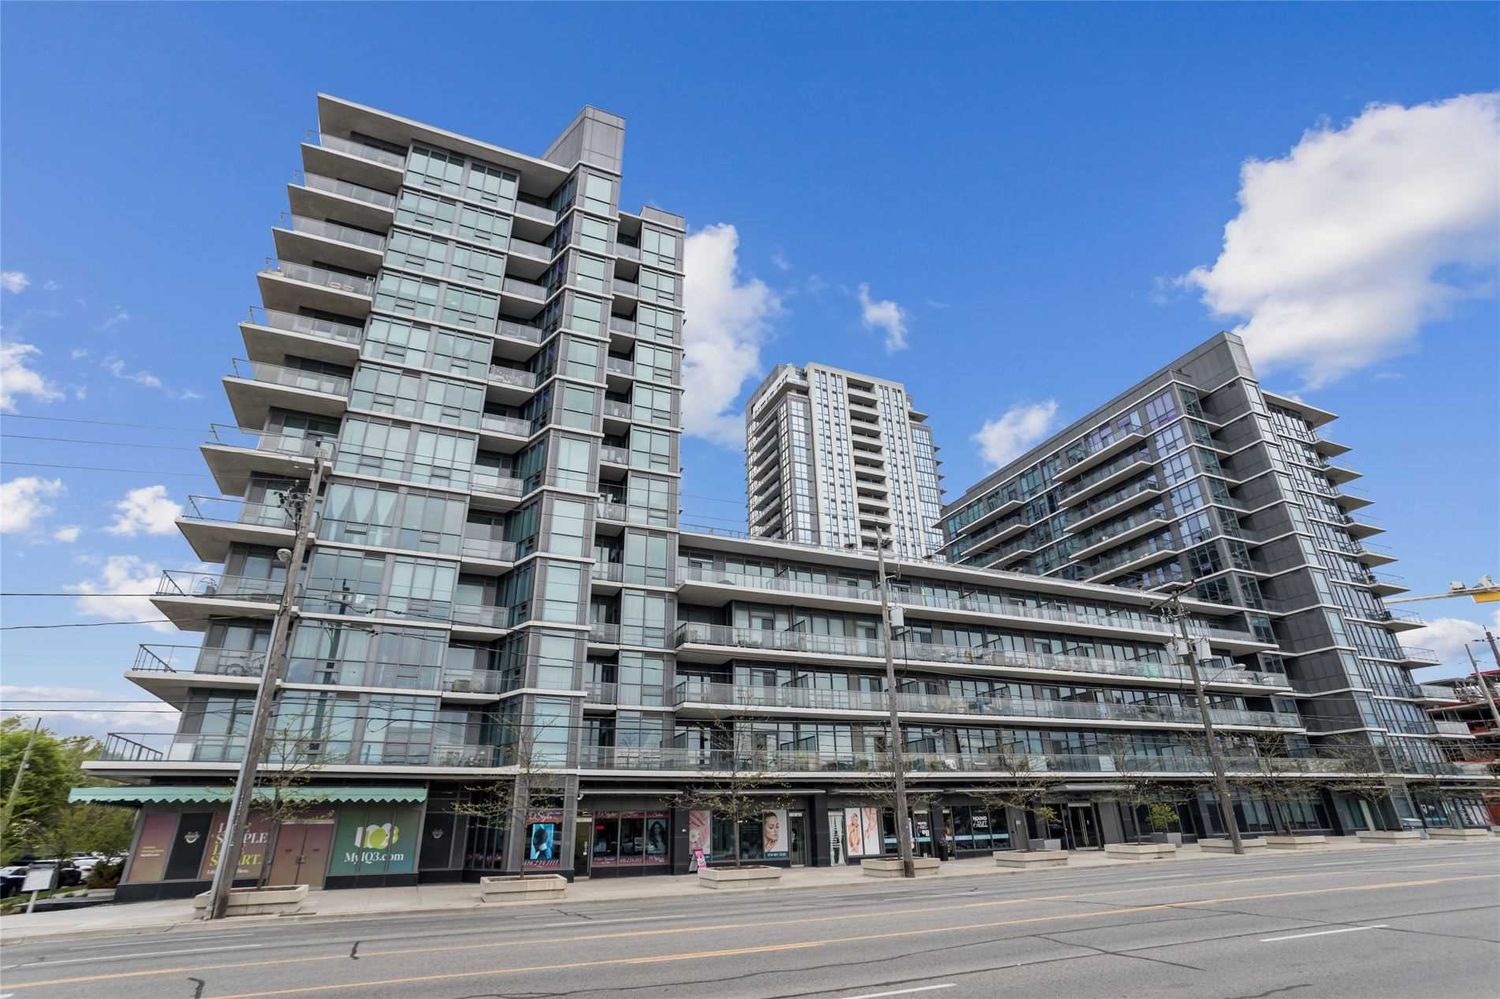 1185 The Queensway. IQ Condos is located in  Etobicoke, Toronto - image #2 of 3